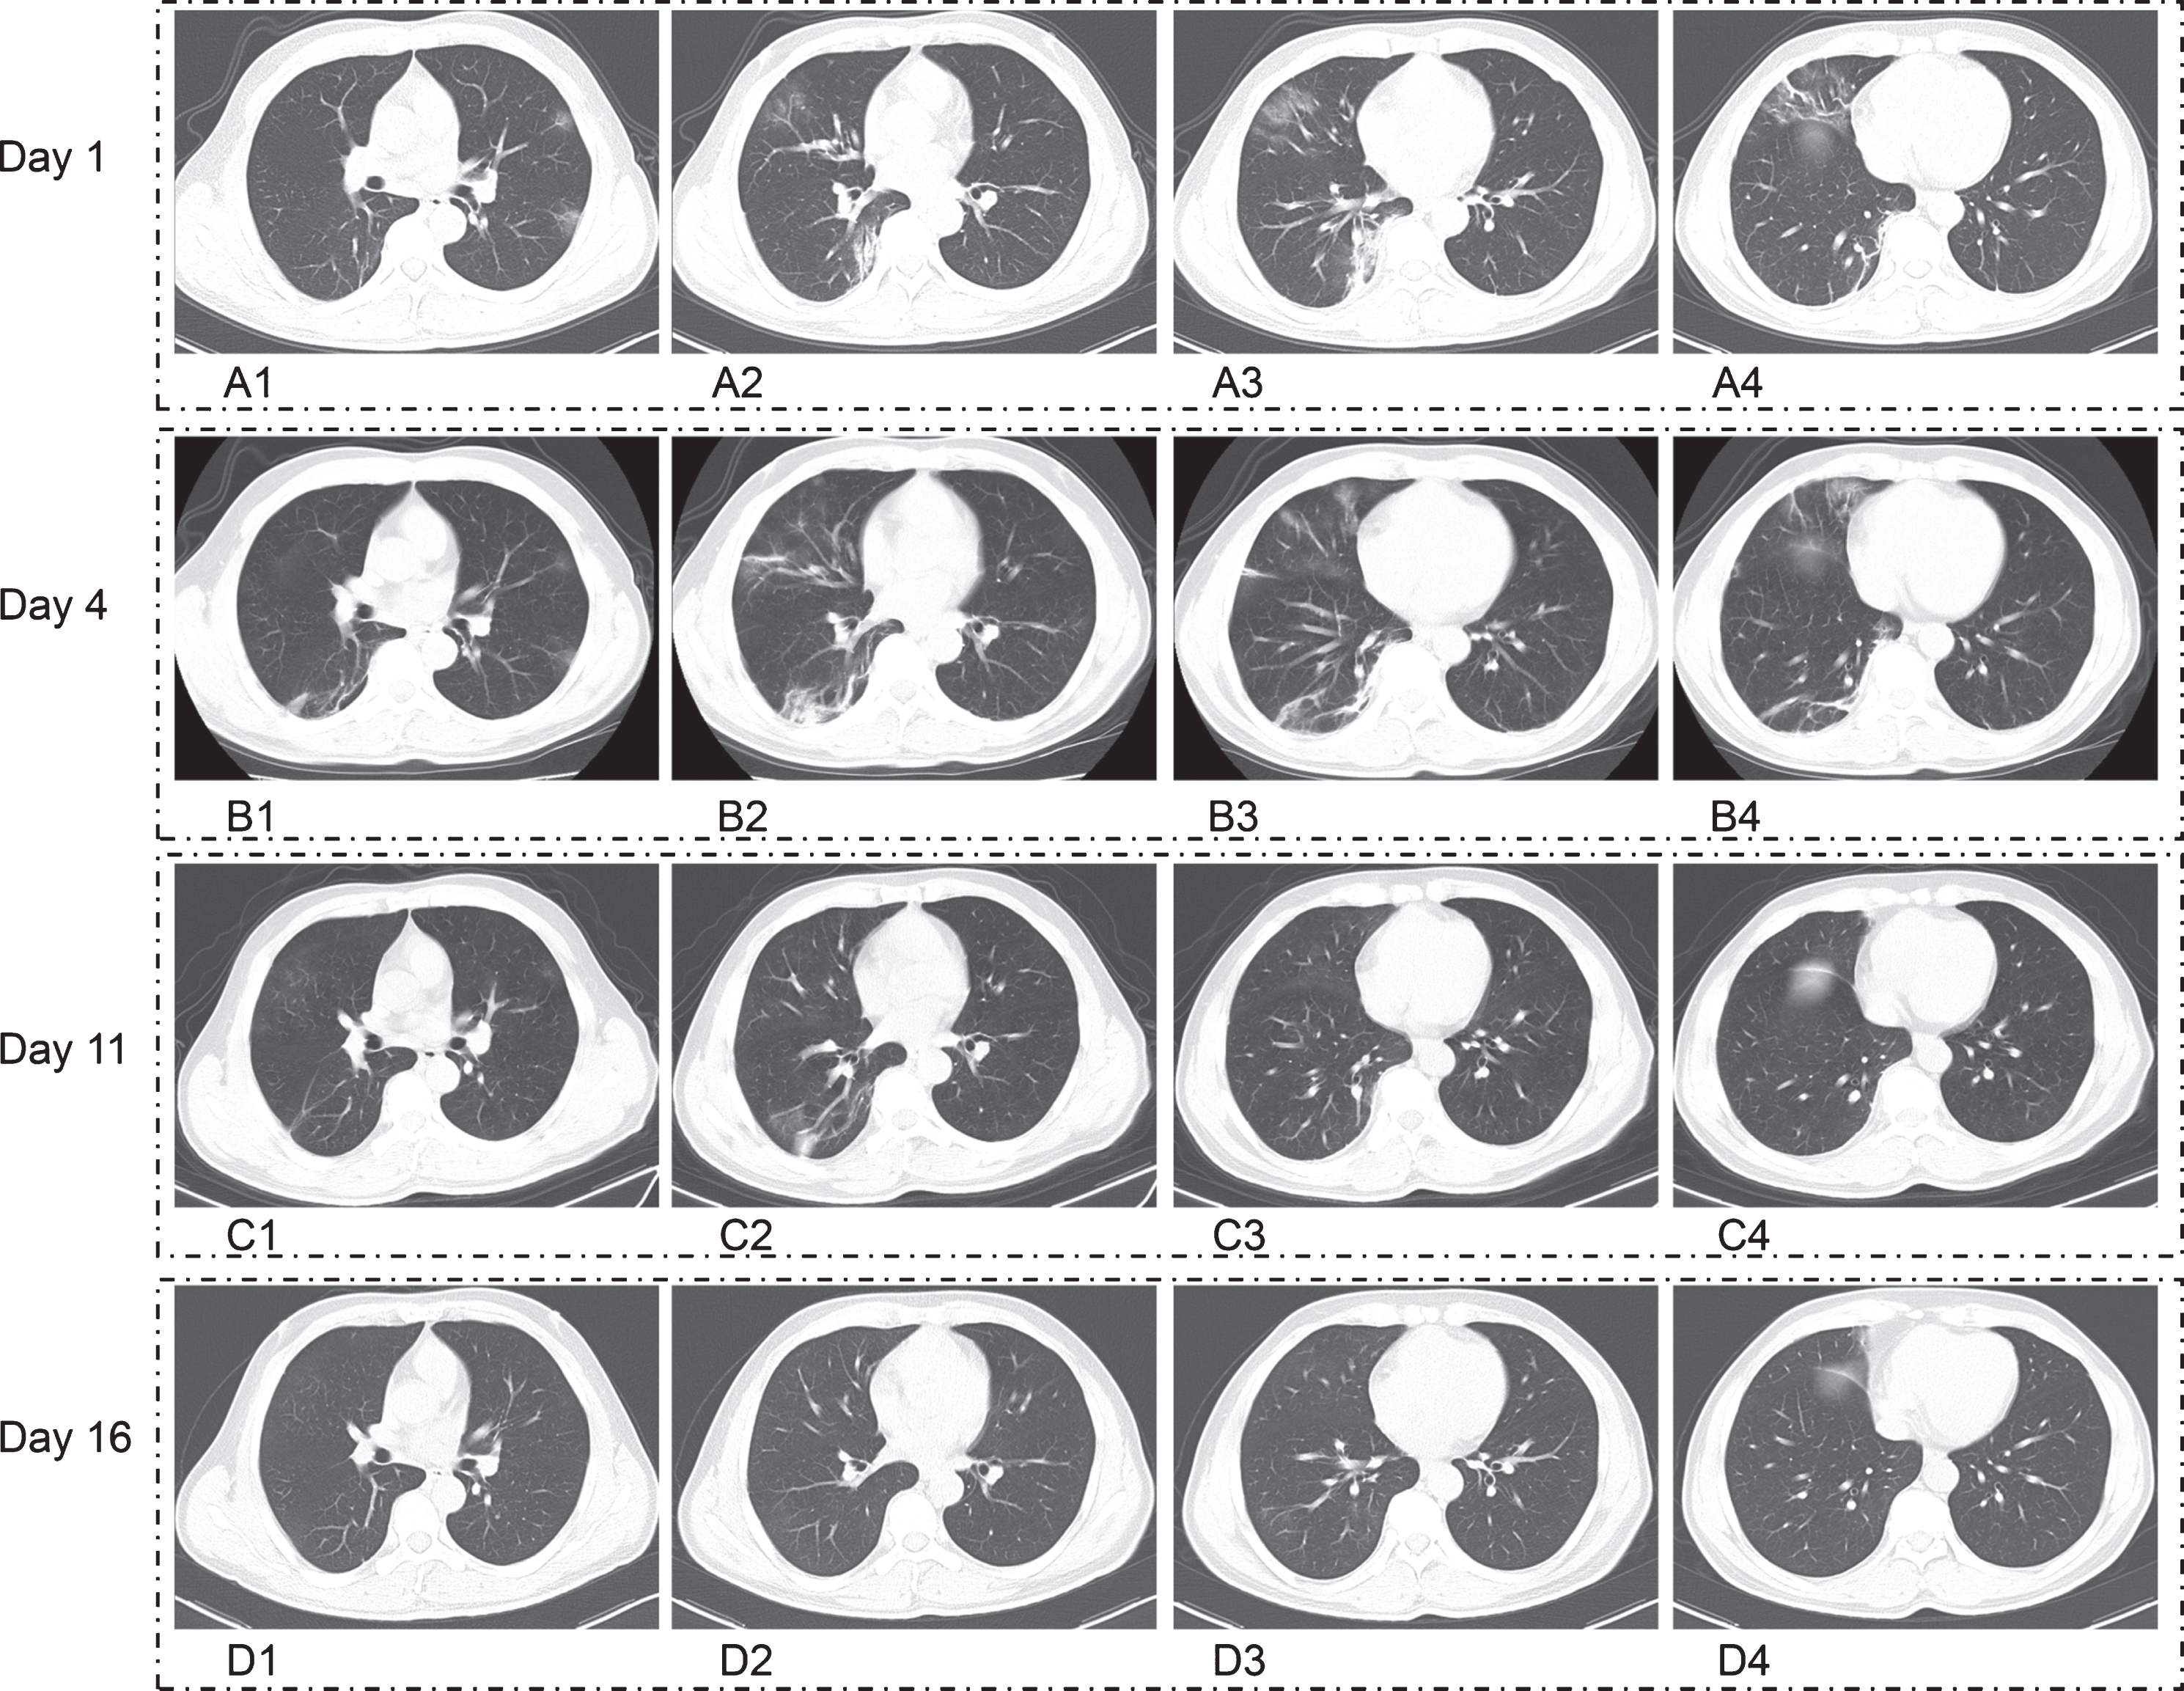 Fifty-one years old man with COVID-19 pneumonia who had the history of exposure for recent travel to Wuhan, with body soreness, headache for 7 days. A1–A4. Axial computed tomographic (CT) images first time revealed that the lesions were involvement of both lung with the CT characteristics of GGO, consolidation, bronchovascular enlarged, irregular linear appearances, and most of lesions distributed peripherally, there were no the CT features of pleural effusion. B1–B4. Following up CT images on day 4 shown that lesion had been progress. C1–C4. Following up CT images on day 11 demonstrated that most of lesions had been absorption after treatment. D1–D4. Following up CT images on day 16 manifested that all of lesions had been absorption.